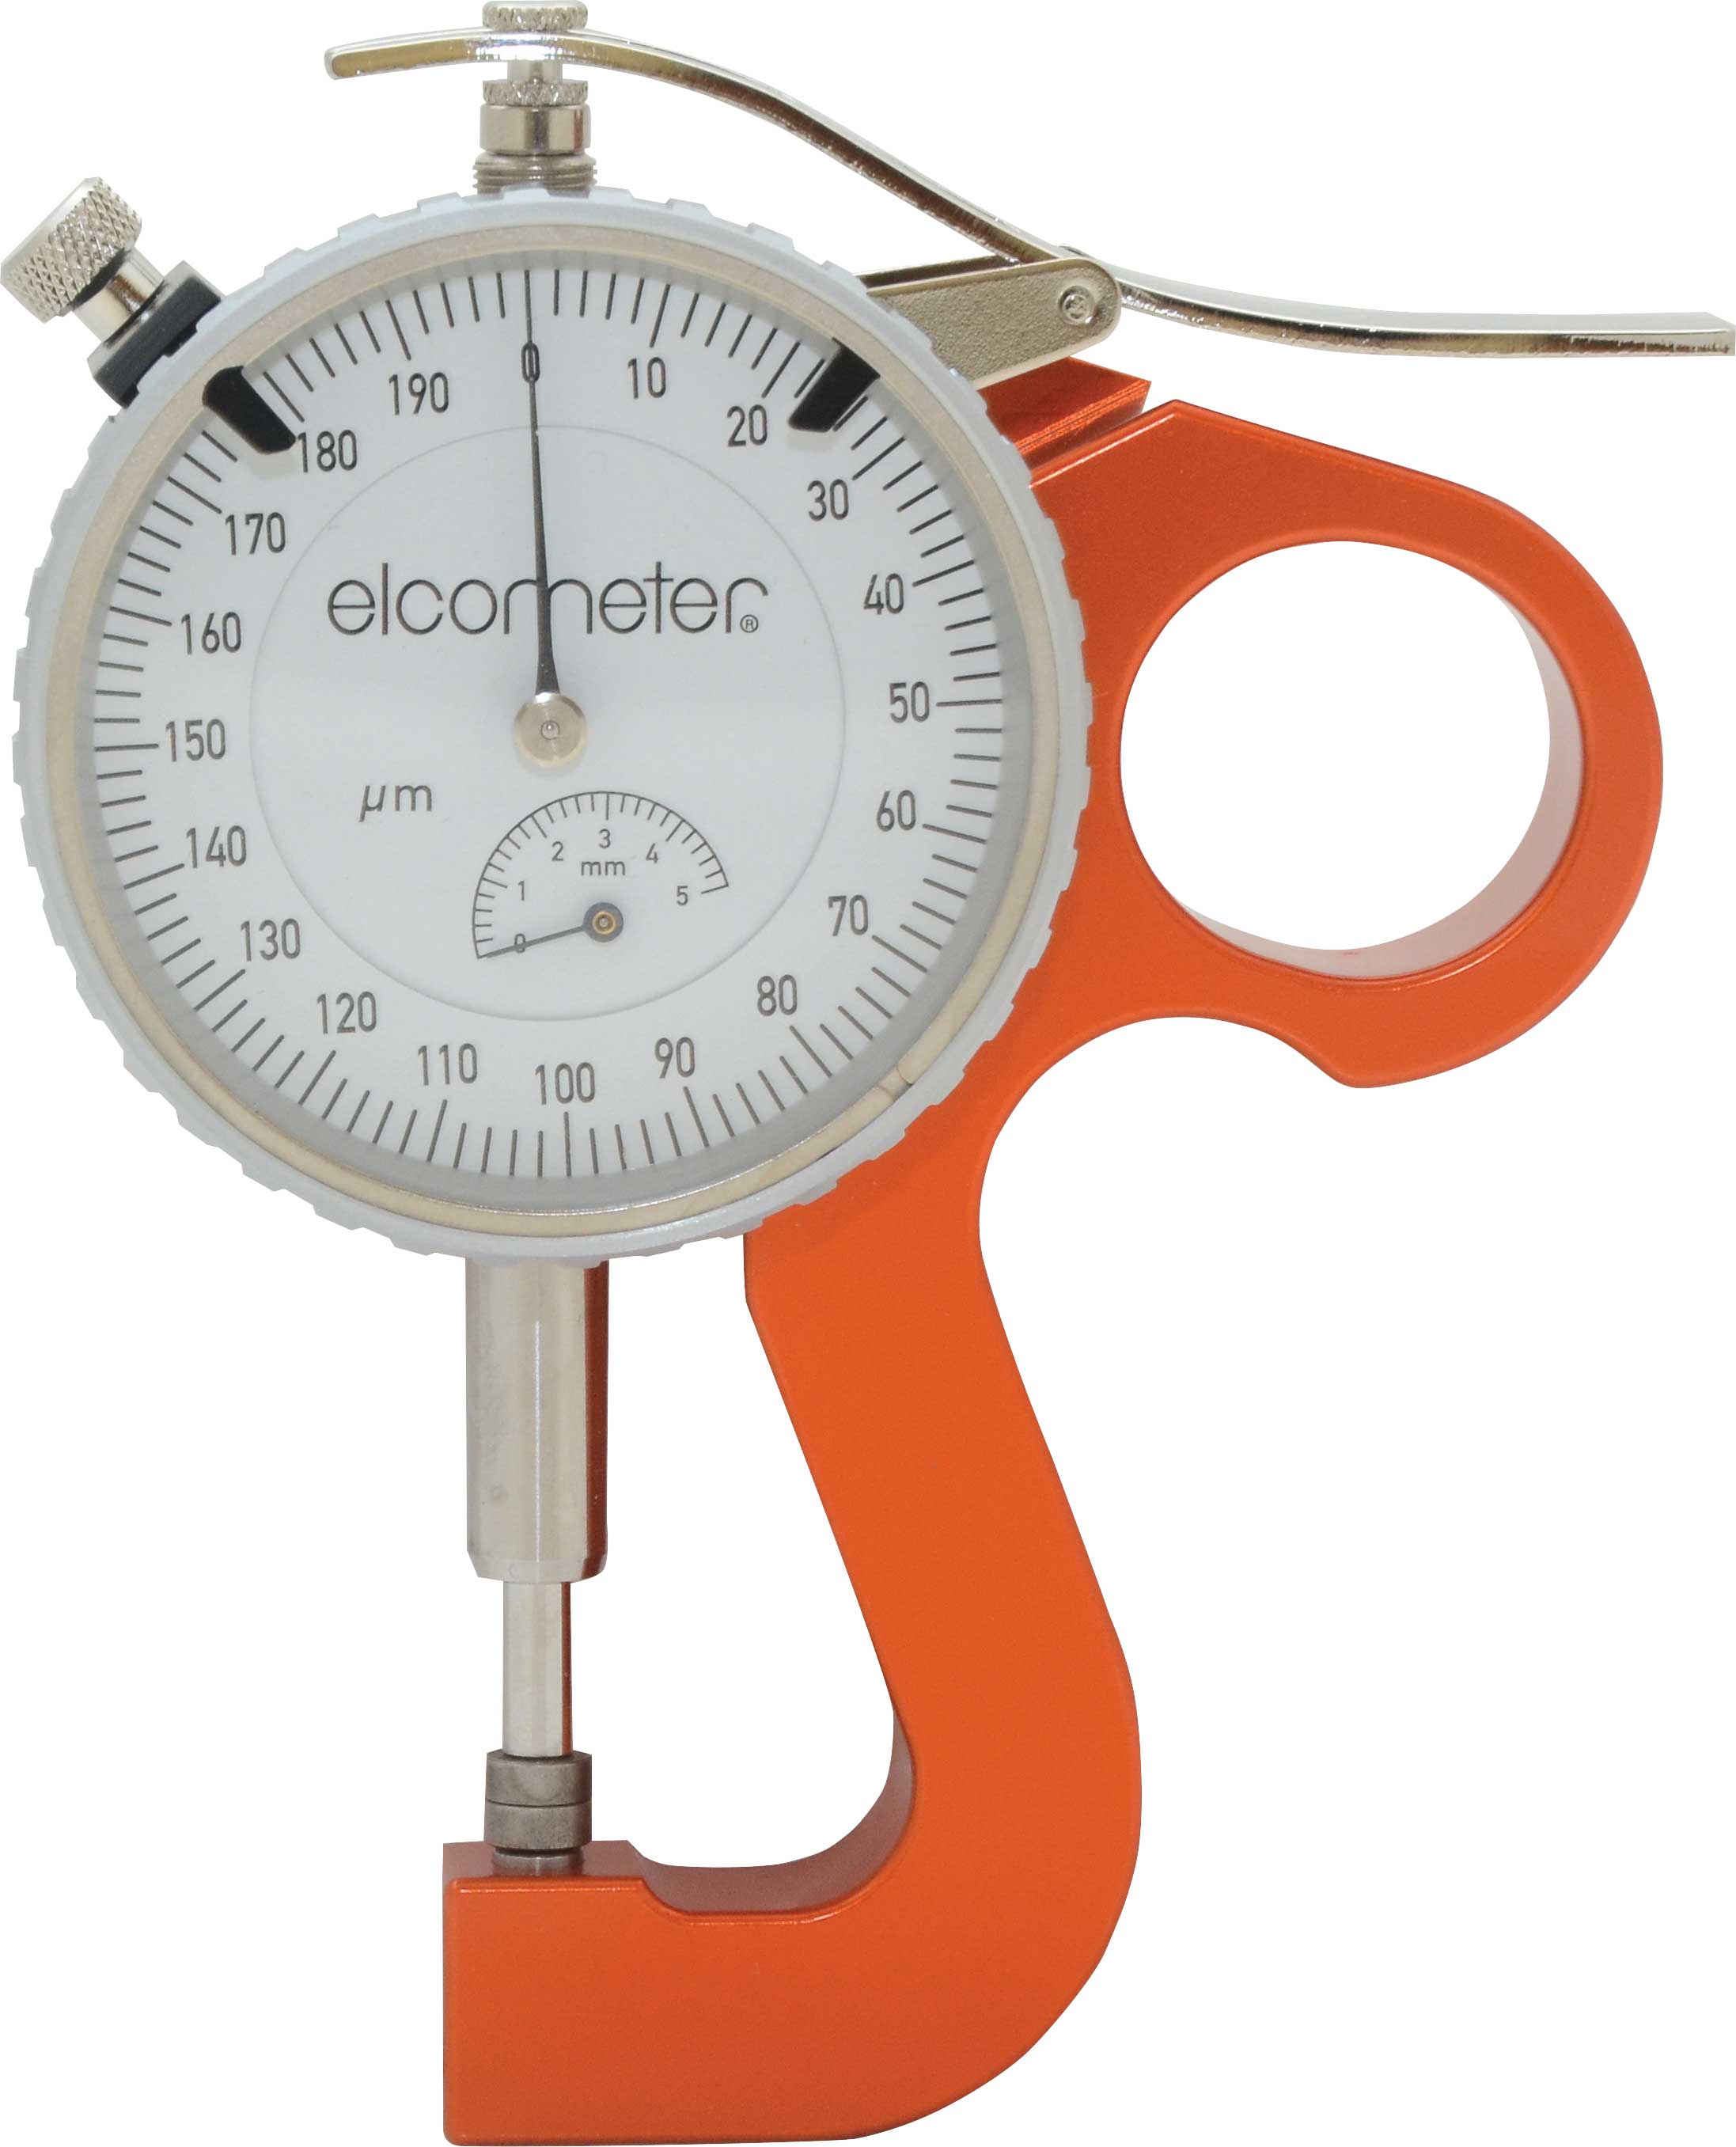 An orange. metal handle shaped to sit in a hand holds up a circular scale and above that is a thin, steel lever when someone's index finger can push down.